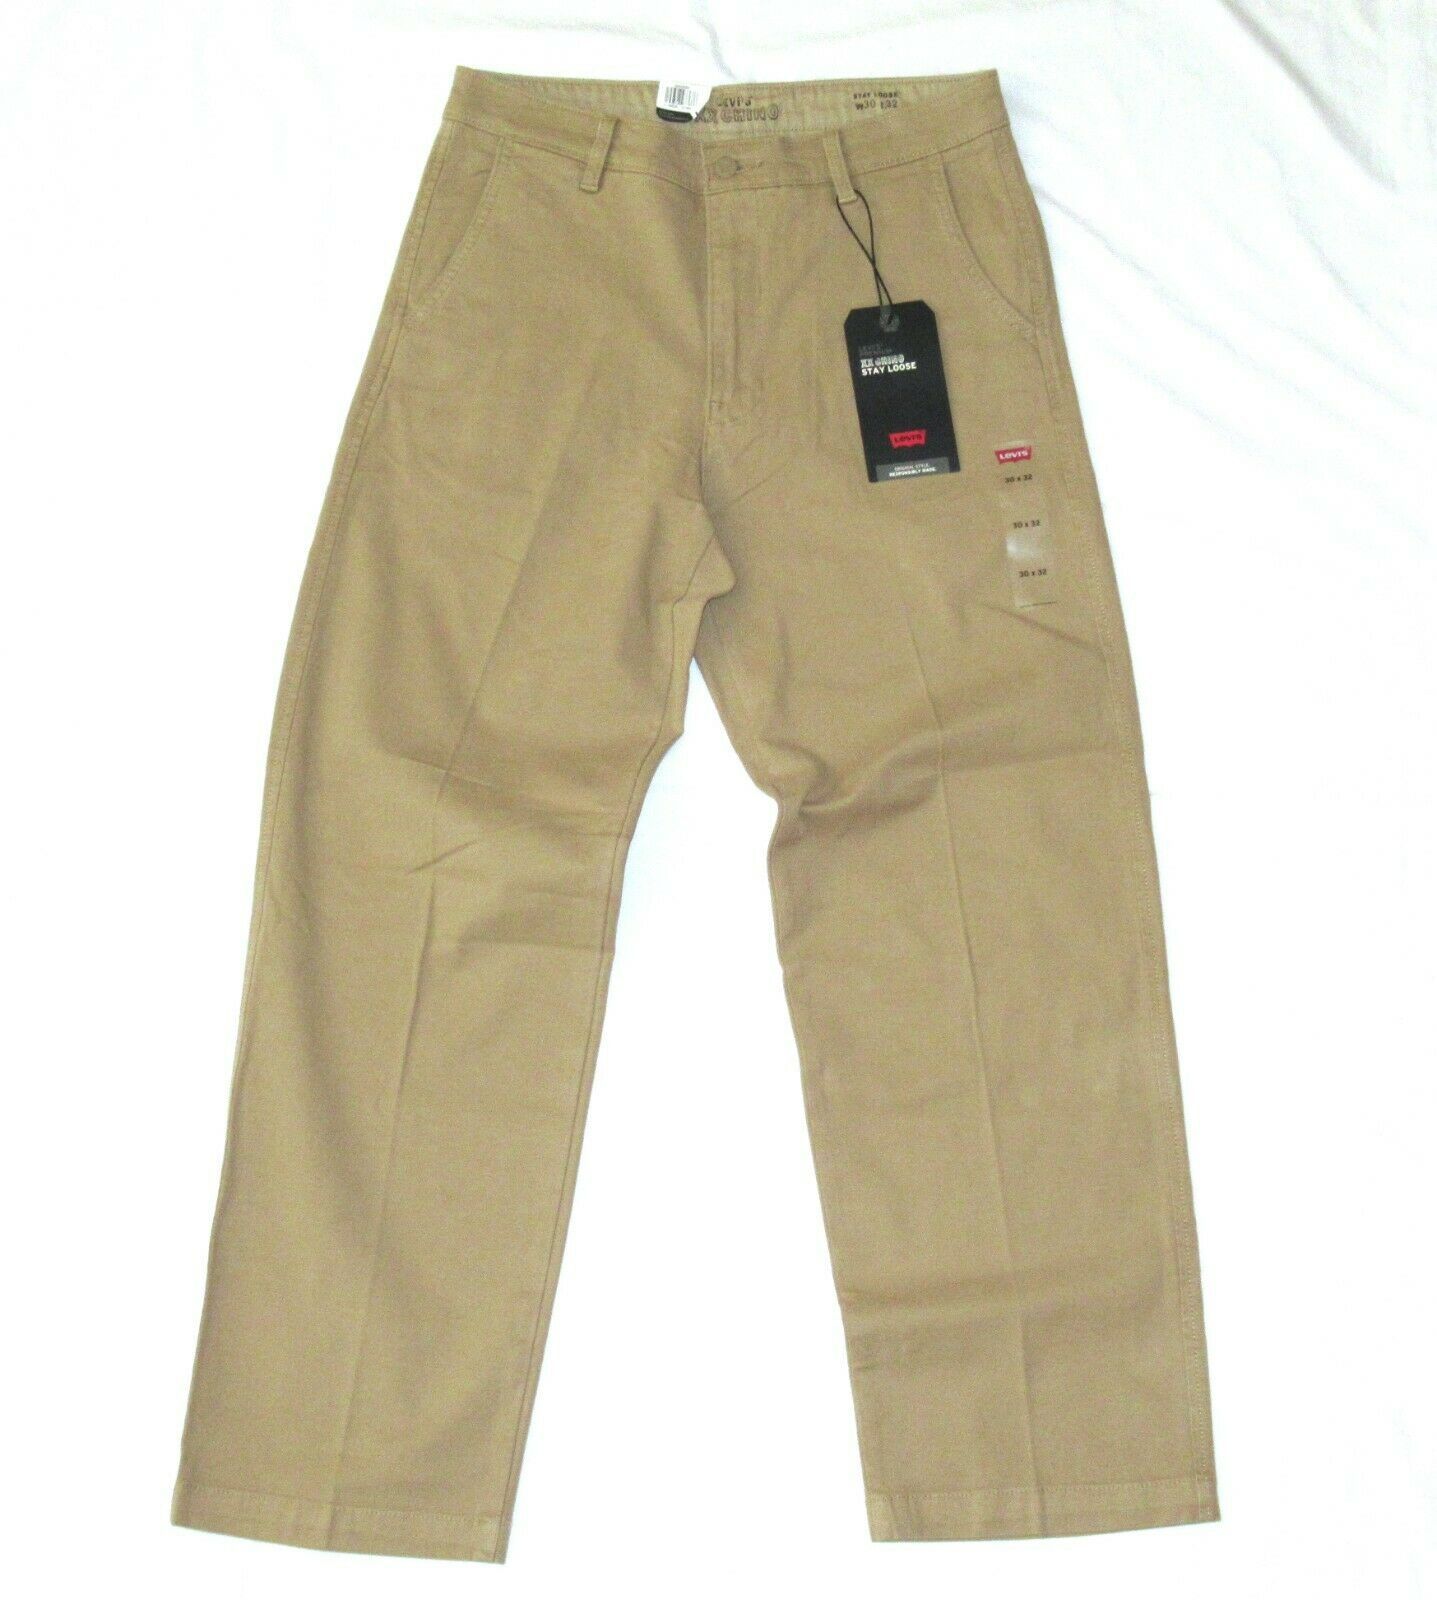 Levis Mens Premier XX Chino Stay Loose Pant Harvest Gold Twill 393520000 Stretch - Pants